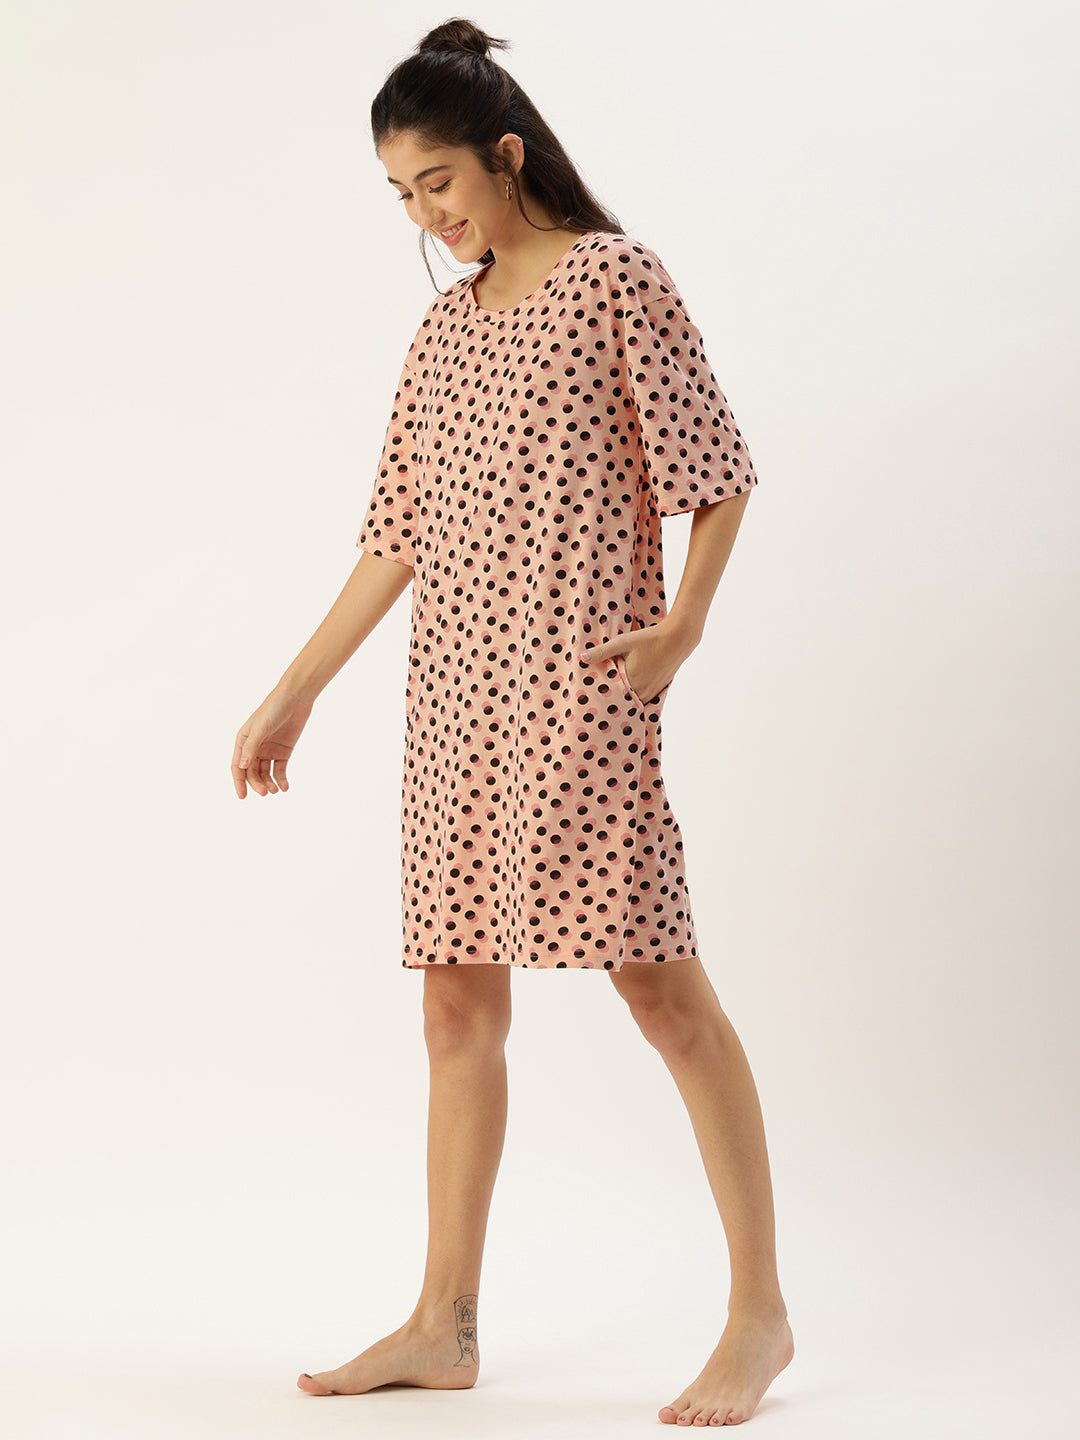 Oversized Polka Party T-Shirt Dress in Peach - 100% Cotton